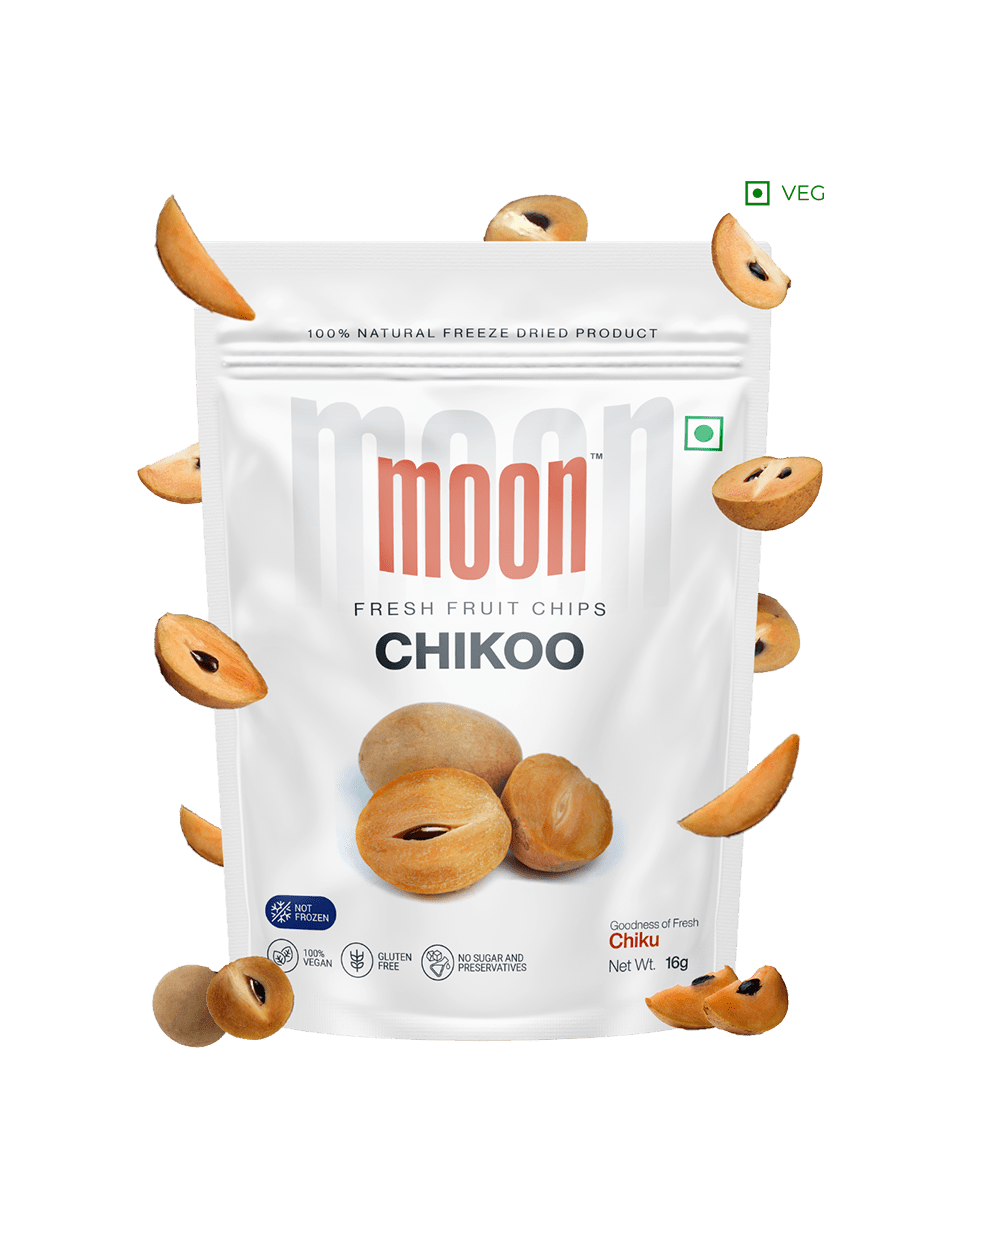 Moon Freeze Dried Chikoo (Size: 16 Grams), known for its antioxidants-rich properties, supports metabolism. Explore the benefits of this unique fruit with its chikoo goodness! Check out Themoonstoreindia for this incredible product.